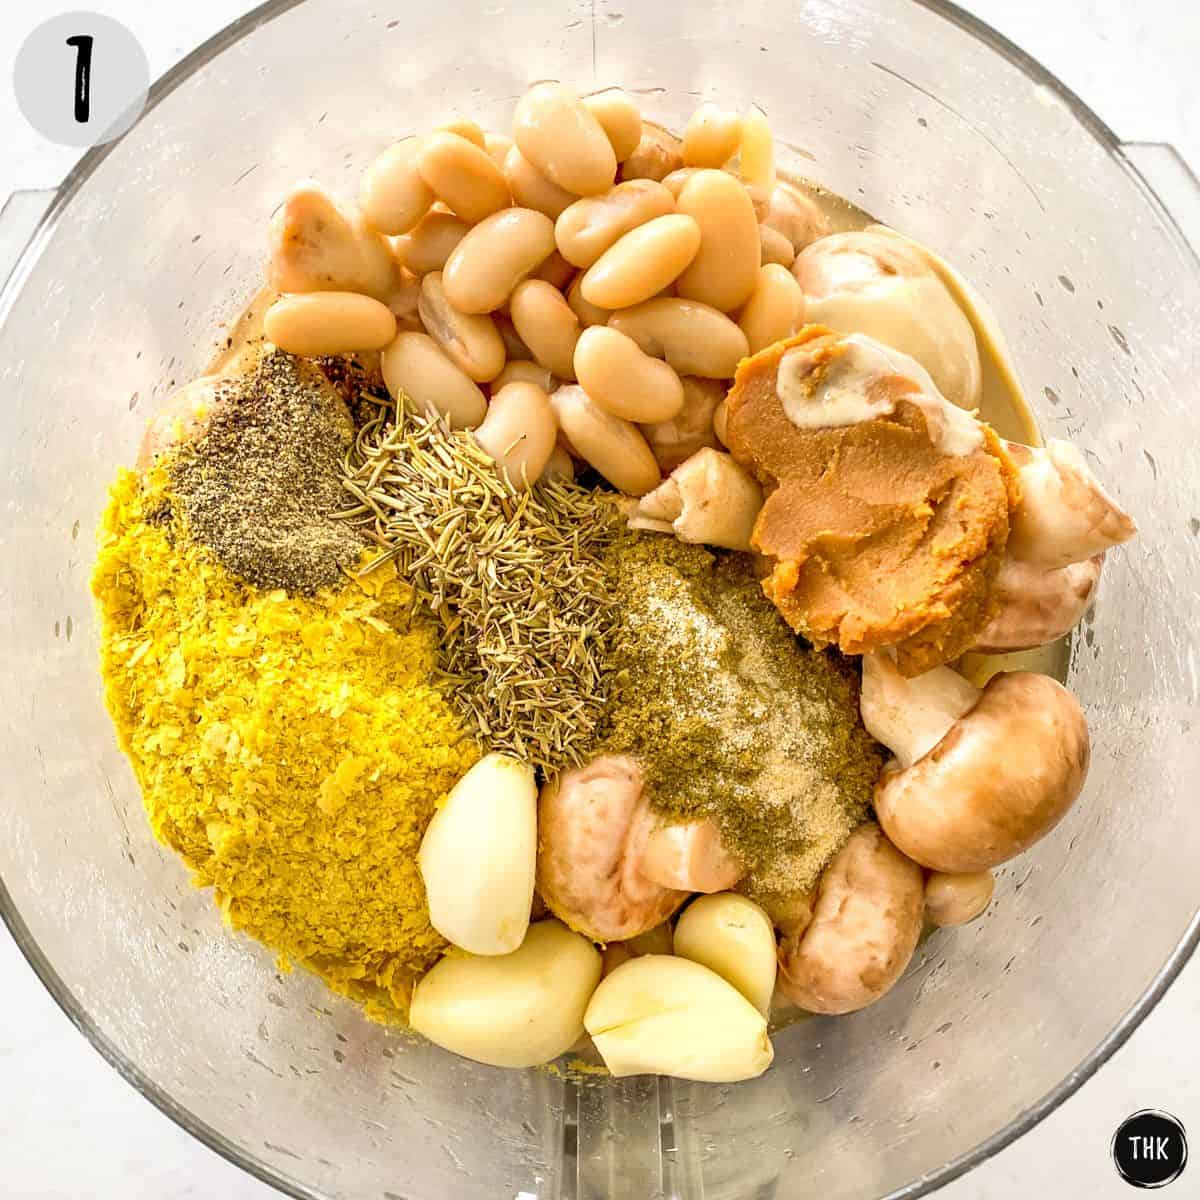 Beans, spices, mushrooms, garlic, and nutritional yeast inside food processor.